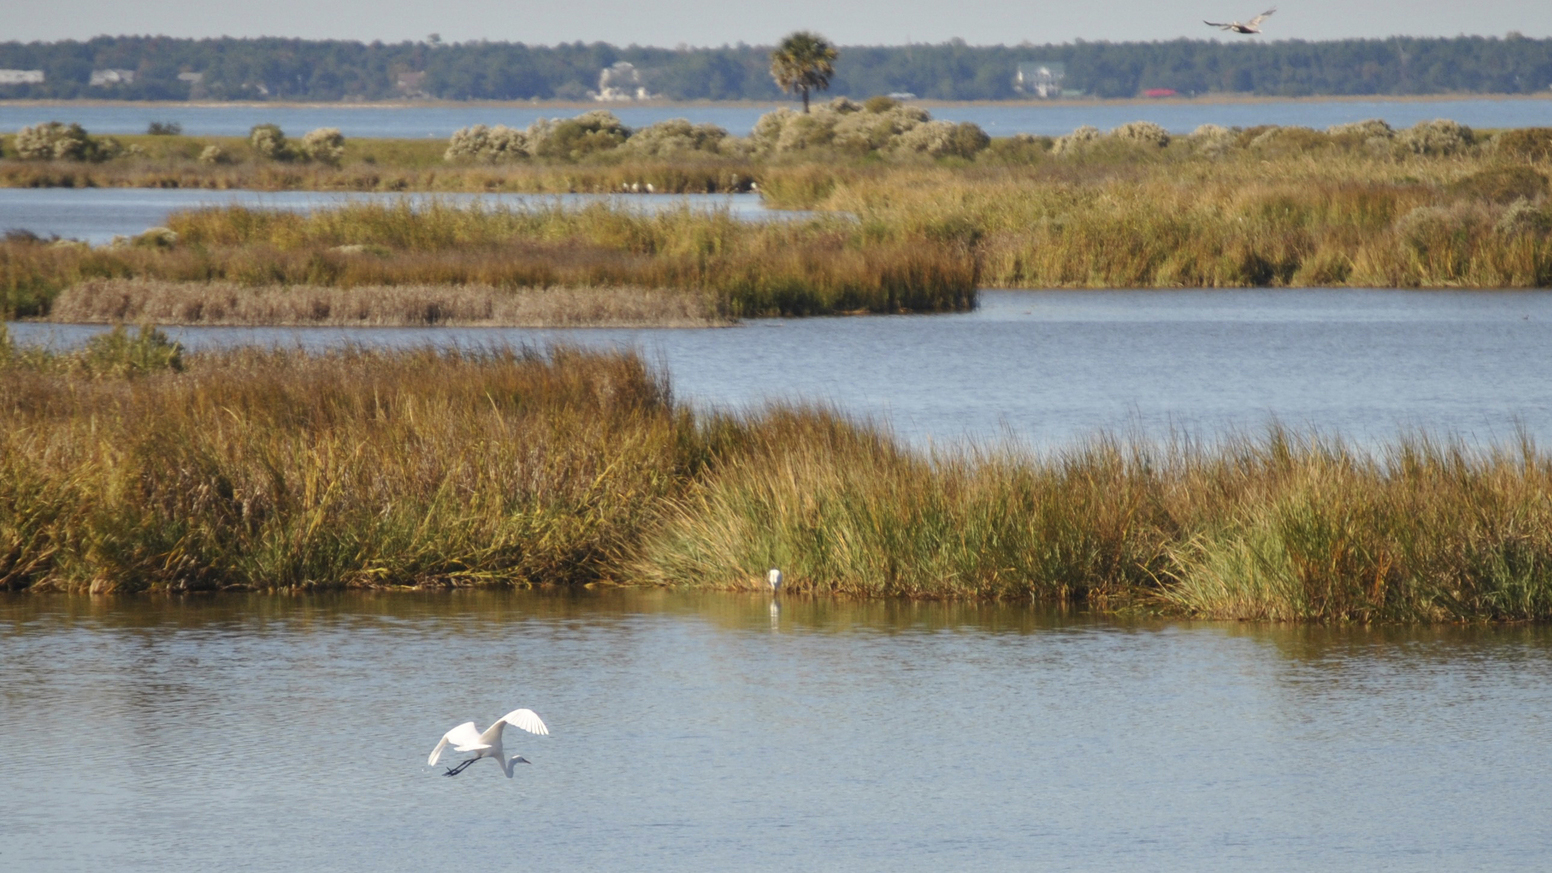 Great Egret flying over salt marsh off of Bull Island. Bull Island is an island TNC played a role in preserving. Photo © Kristine Hartvigsen